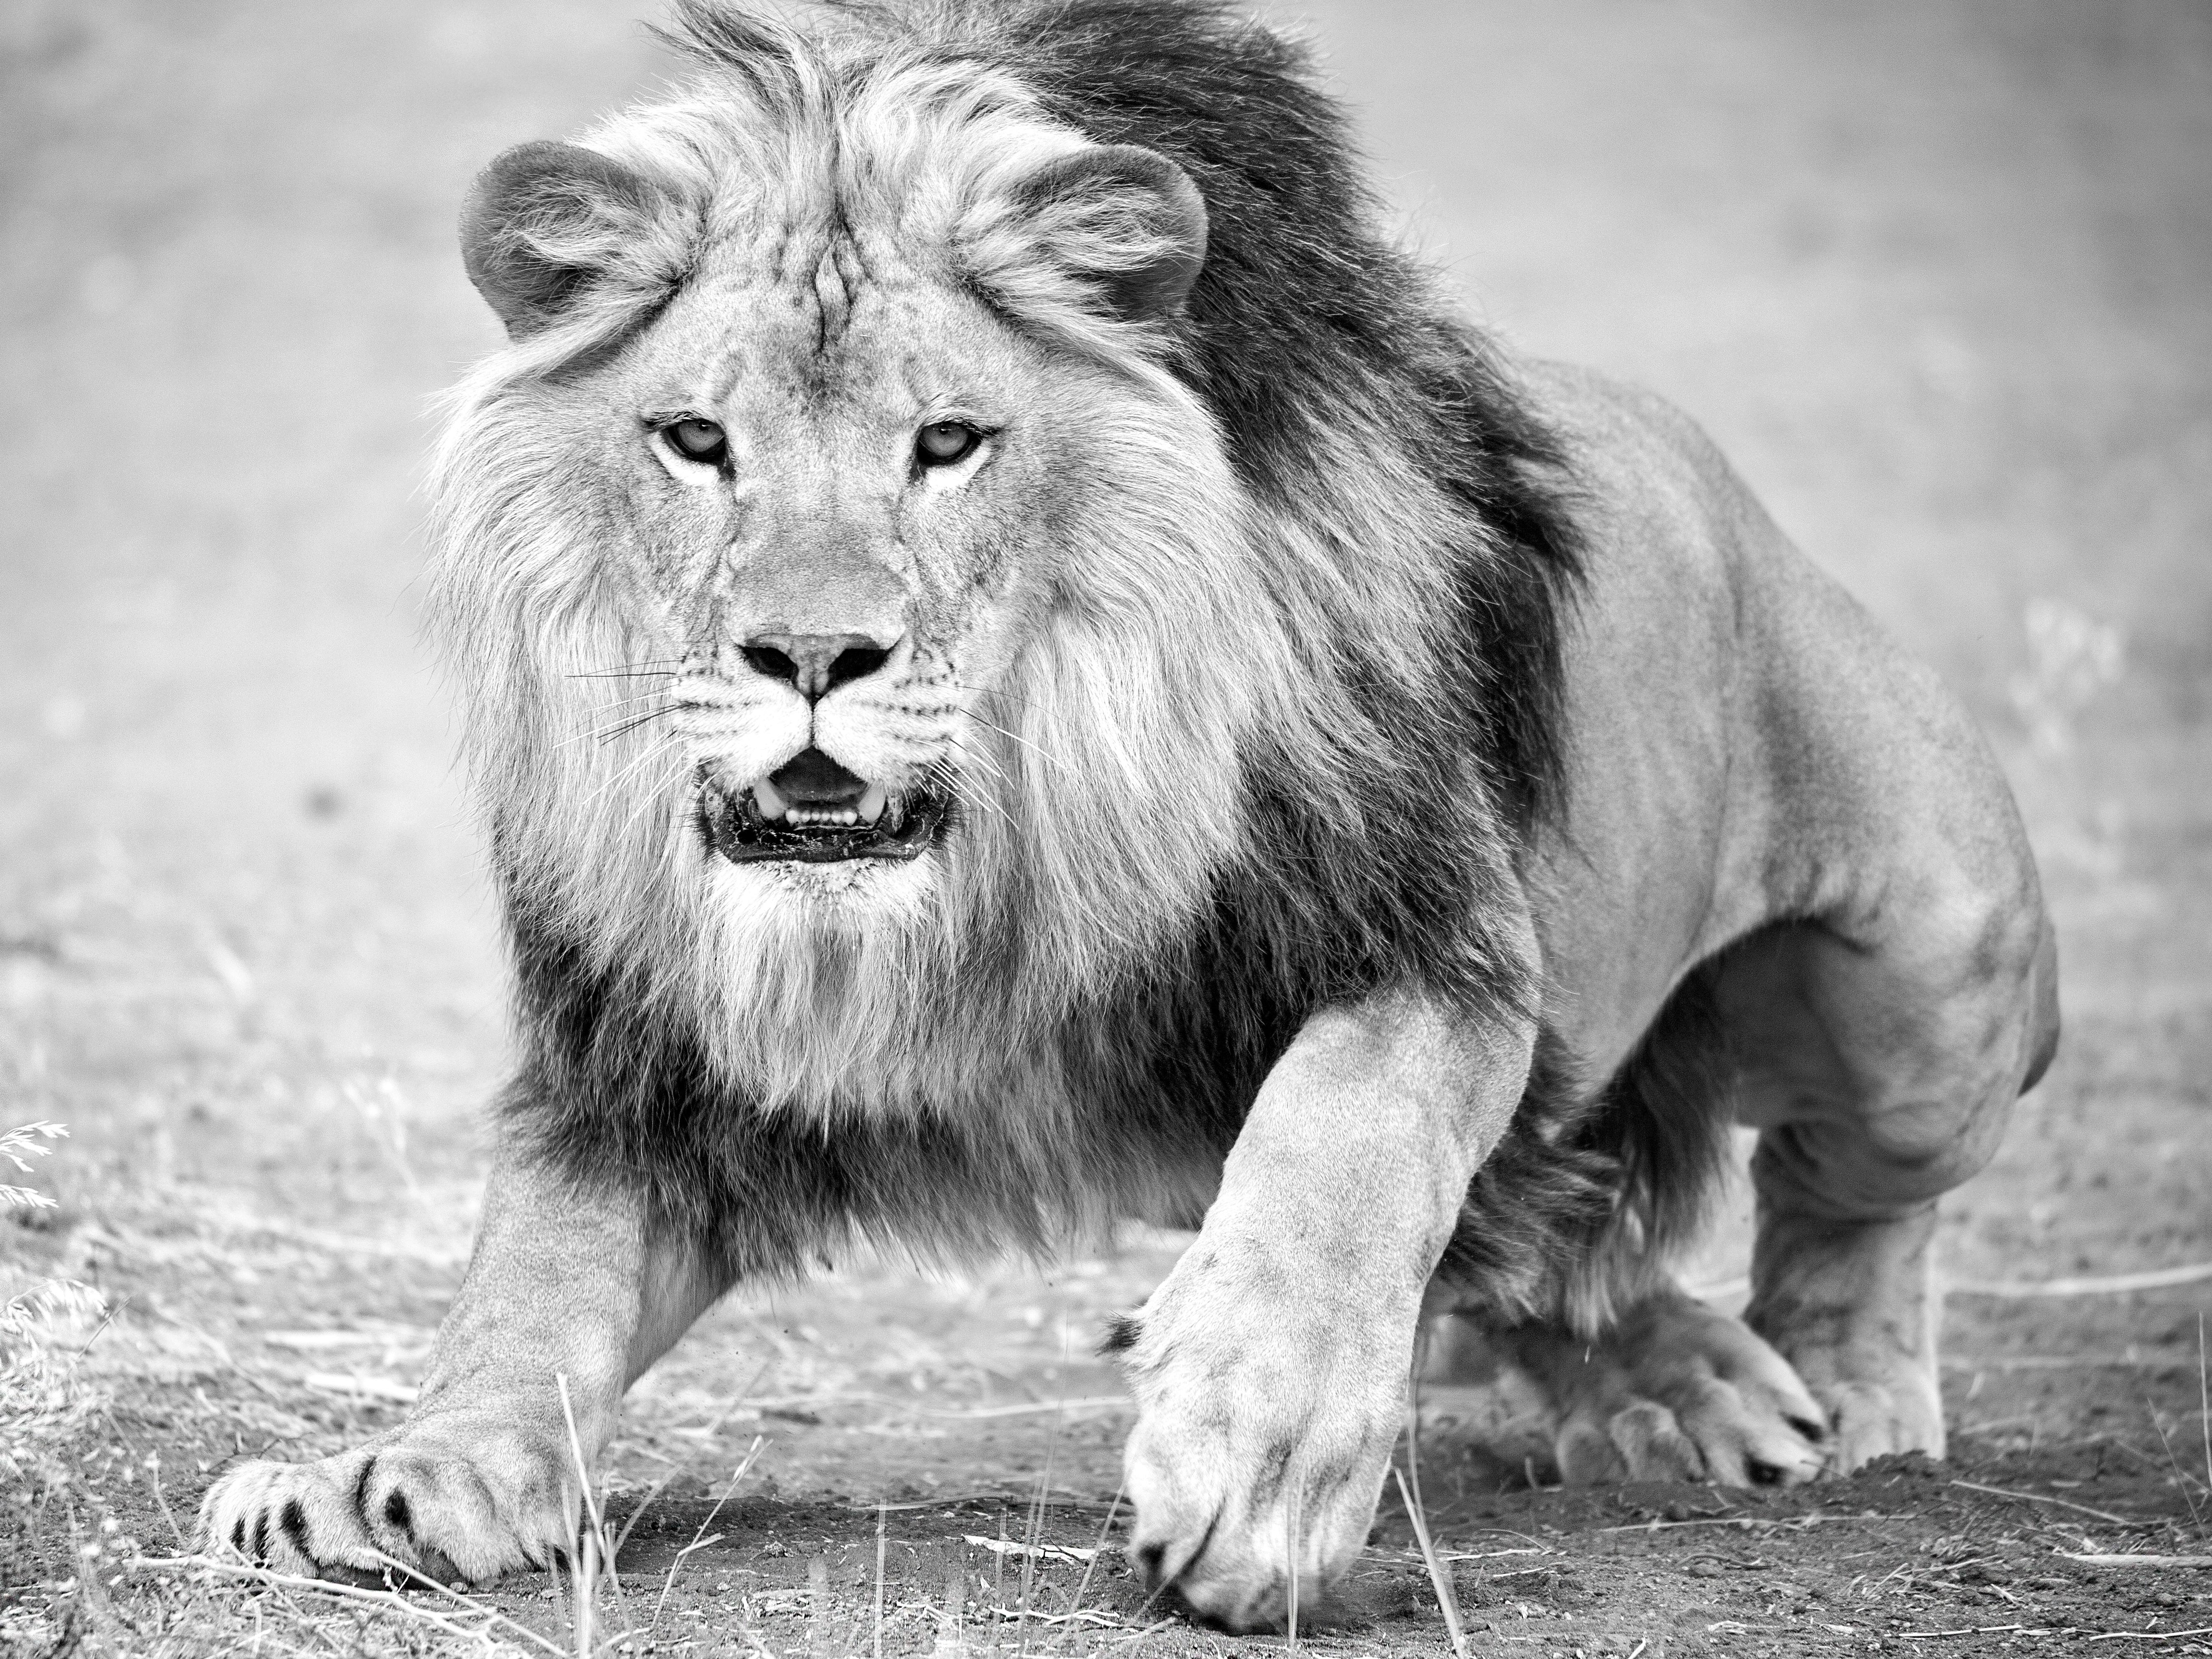 Shane Russeck Animal Print - "The Charge" 50x60 - Black & White Photography, Lion Photograph, Unsigned Print